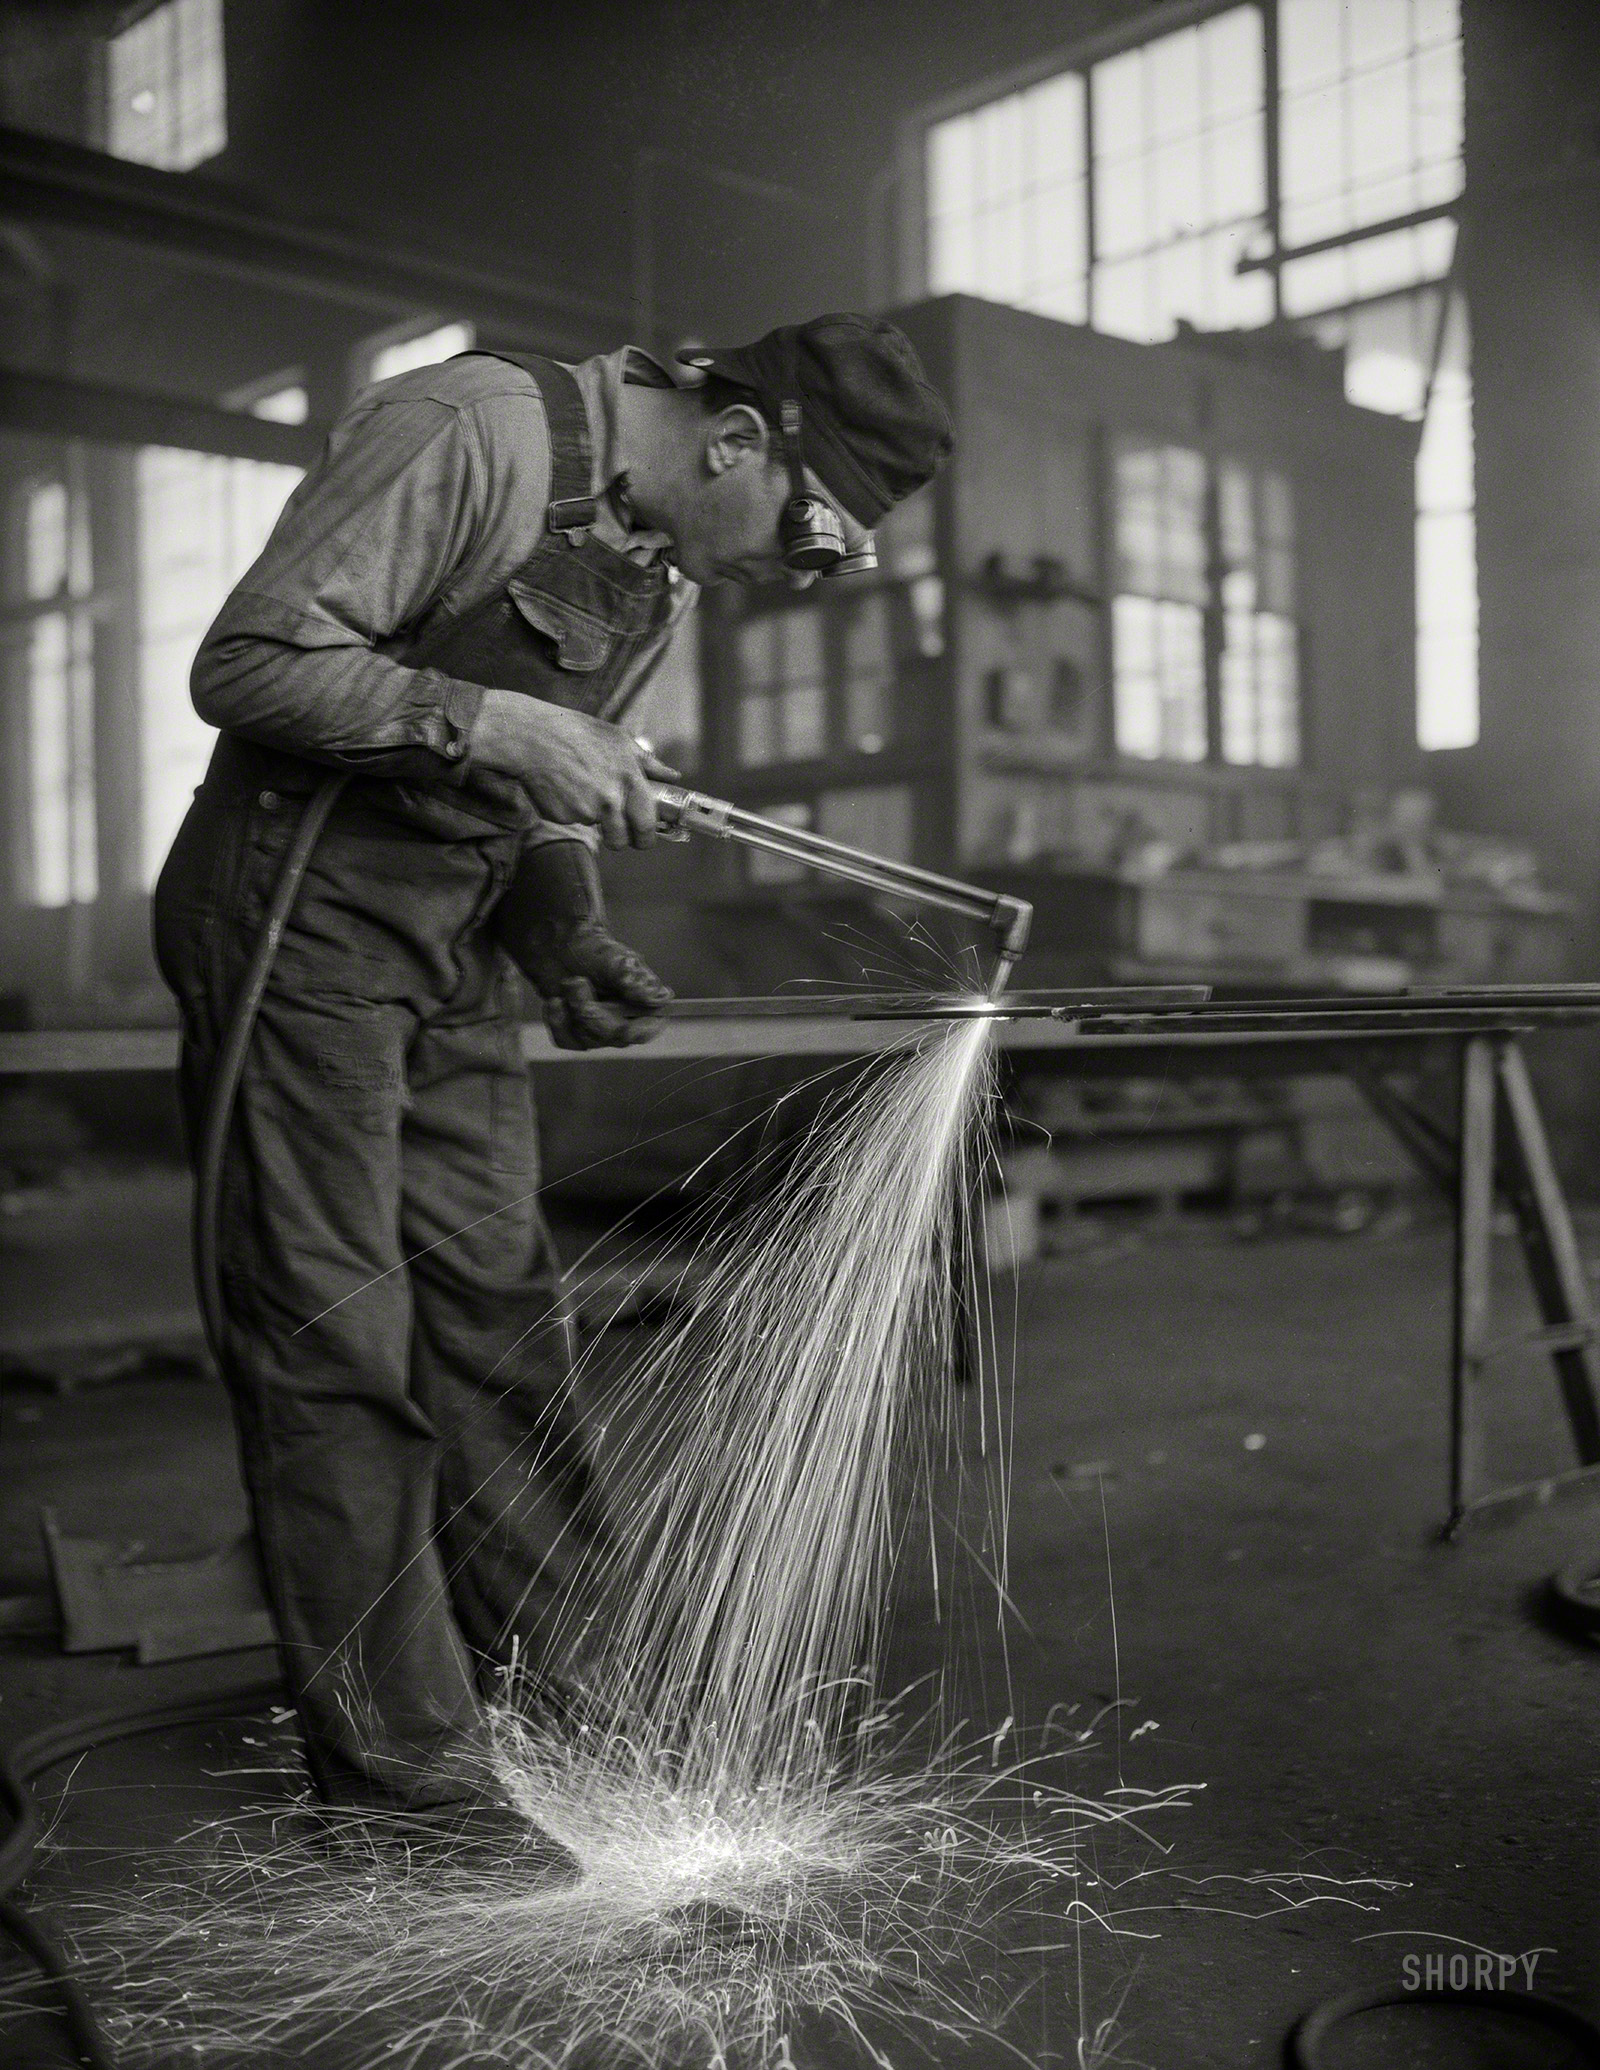 May 1942. "Twenty-four hours a day the sparks from acetylene torches of steel workers in eight Denver fabricating plants are flying thick and fast that the U.S. Navy may carry the battle to the enemy in all parts of the world. Here in secluded Denver, the world's largest city not on a navigable waterway, this war production worker, who has never seen a battleship or an ocean, fashions the steel hull parts which are being assembled at Mare Island Navy Yard in California -- 1,200 miles from where he and his fellow workers are on the job to help 'keep 'em sailing'." Office of War Information, photographer unknown. View full size.